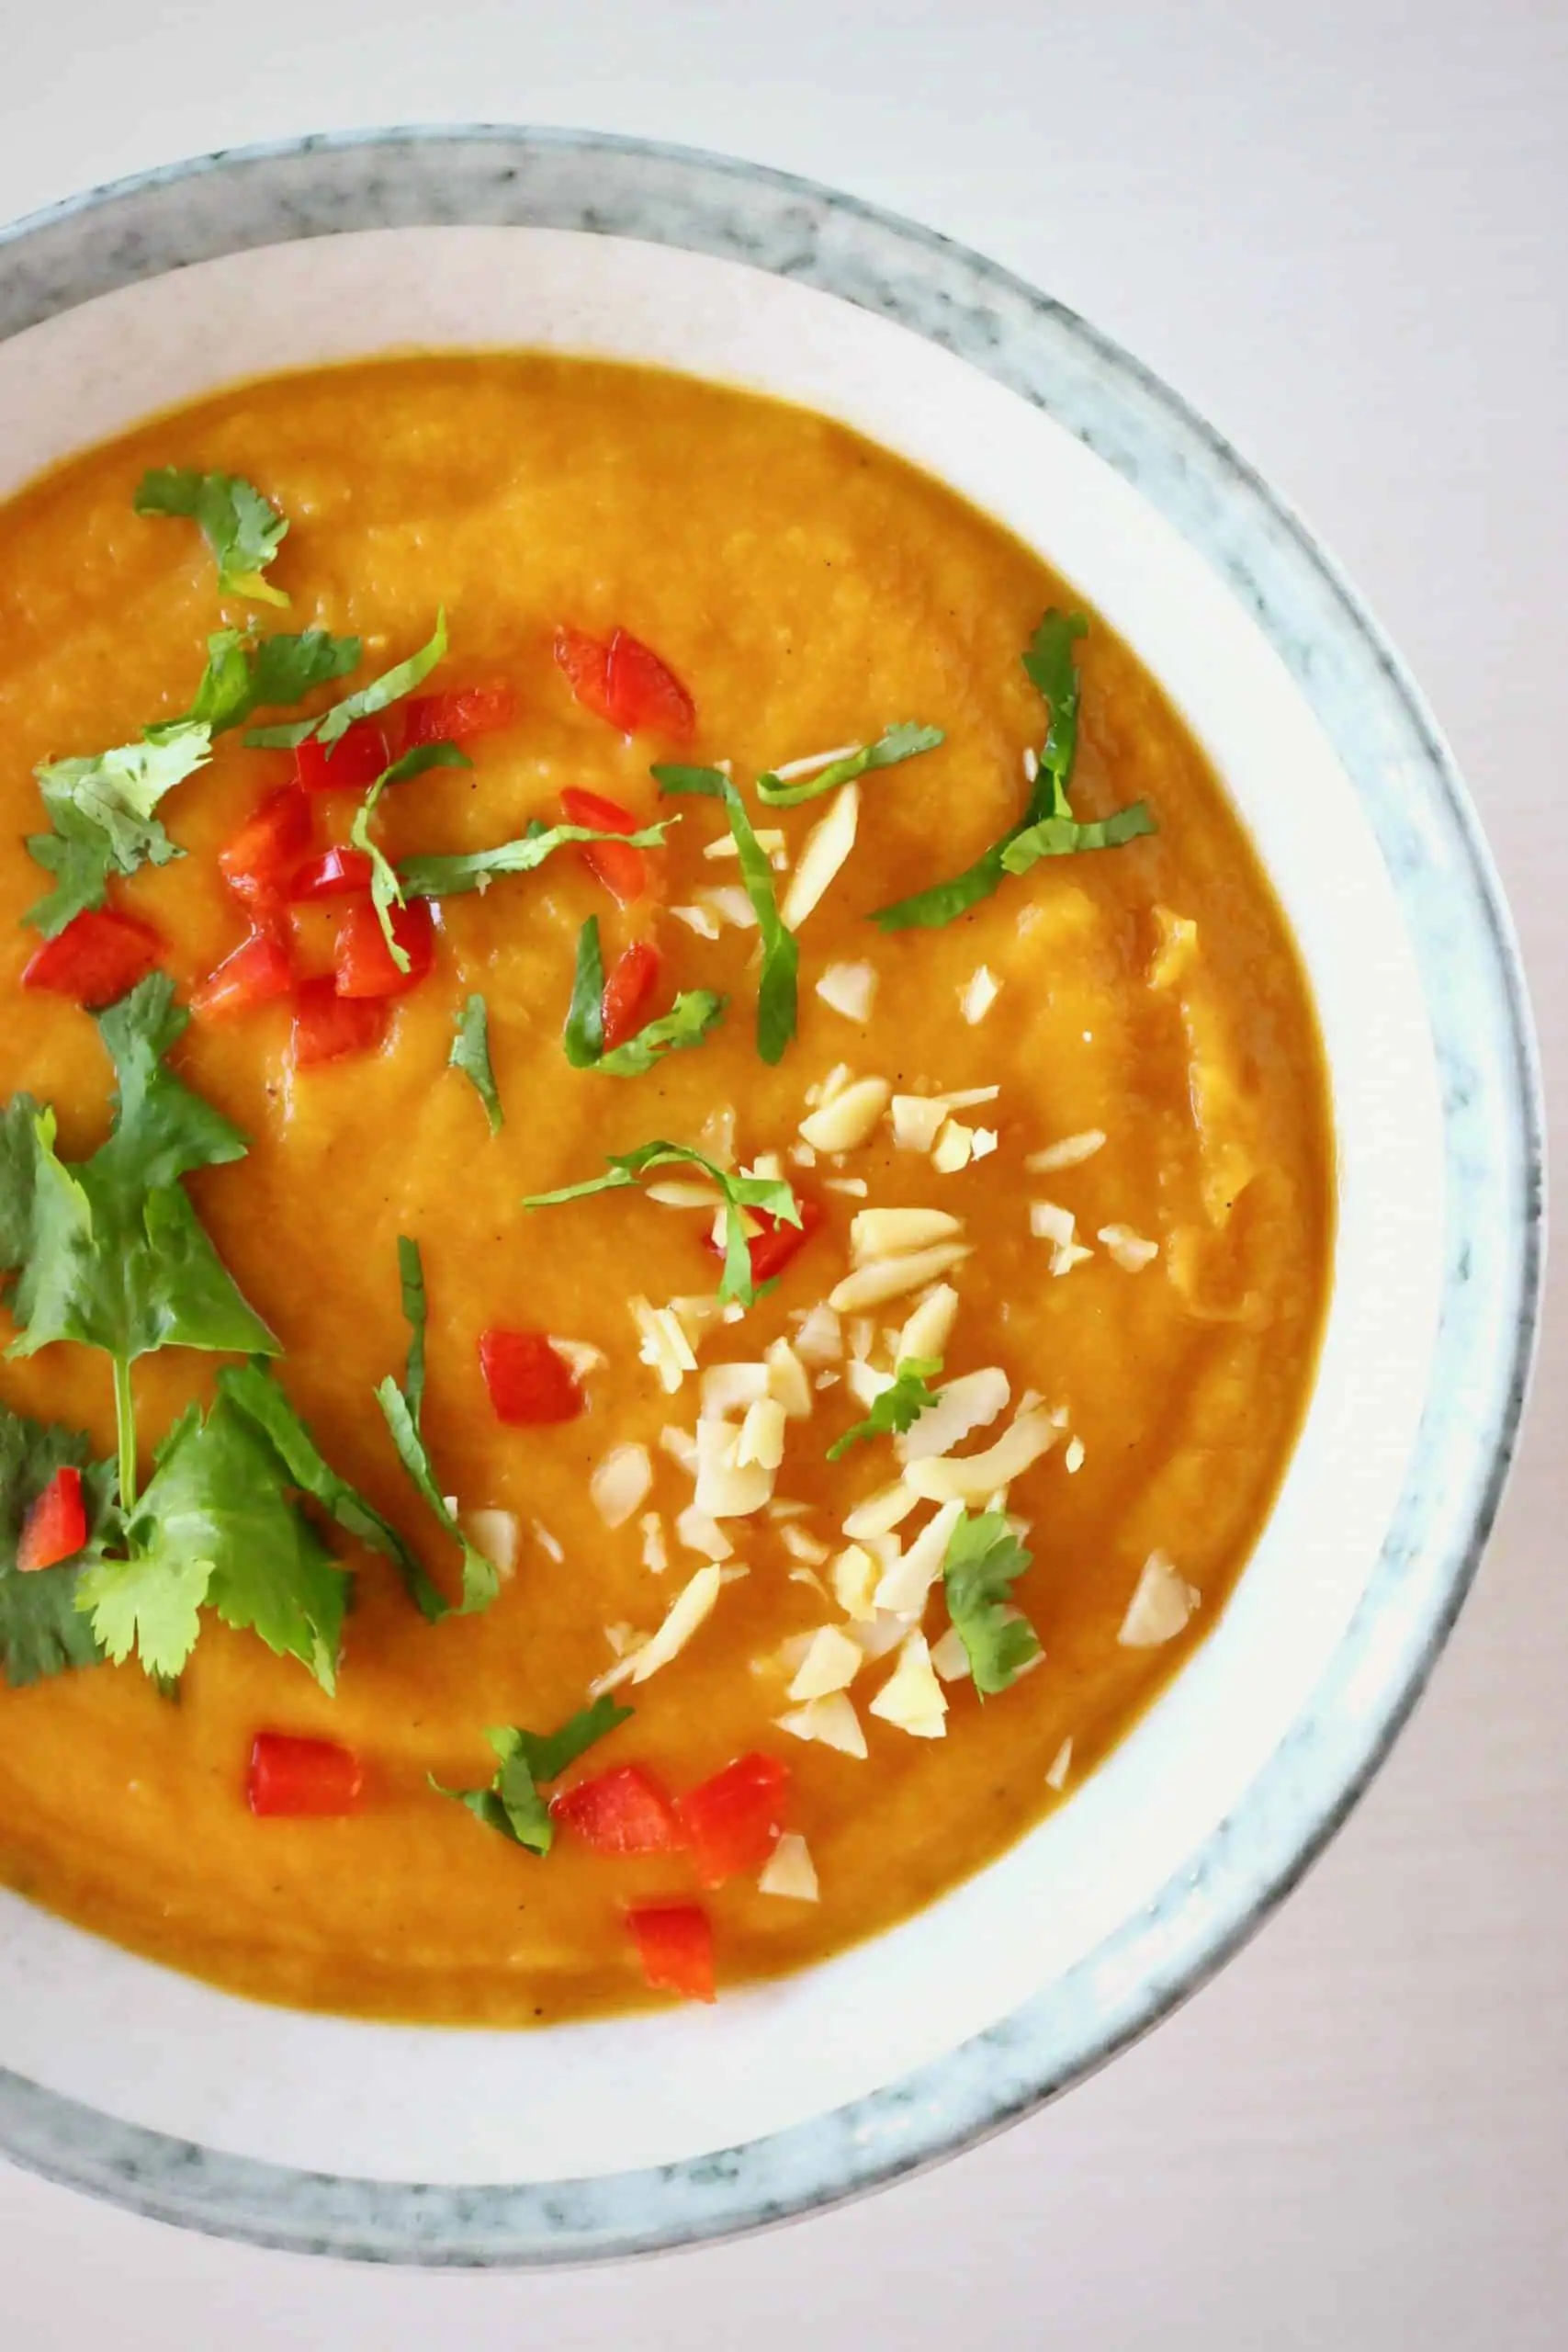 Orange soup topped with green herbs, red peppers and chopped peanuts in a grey bowl 